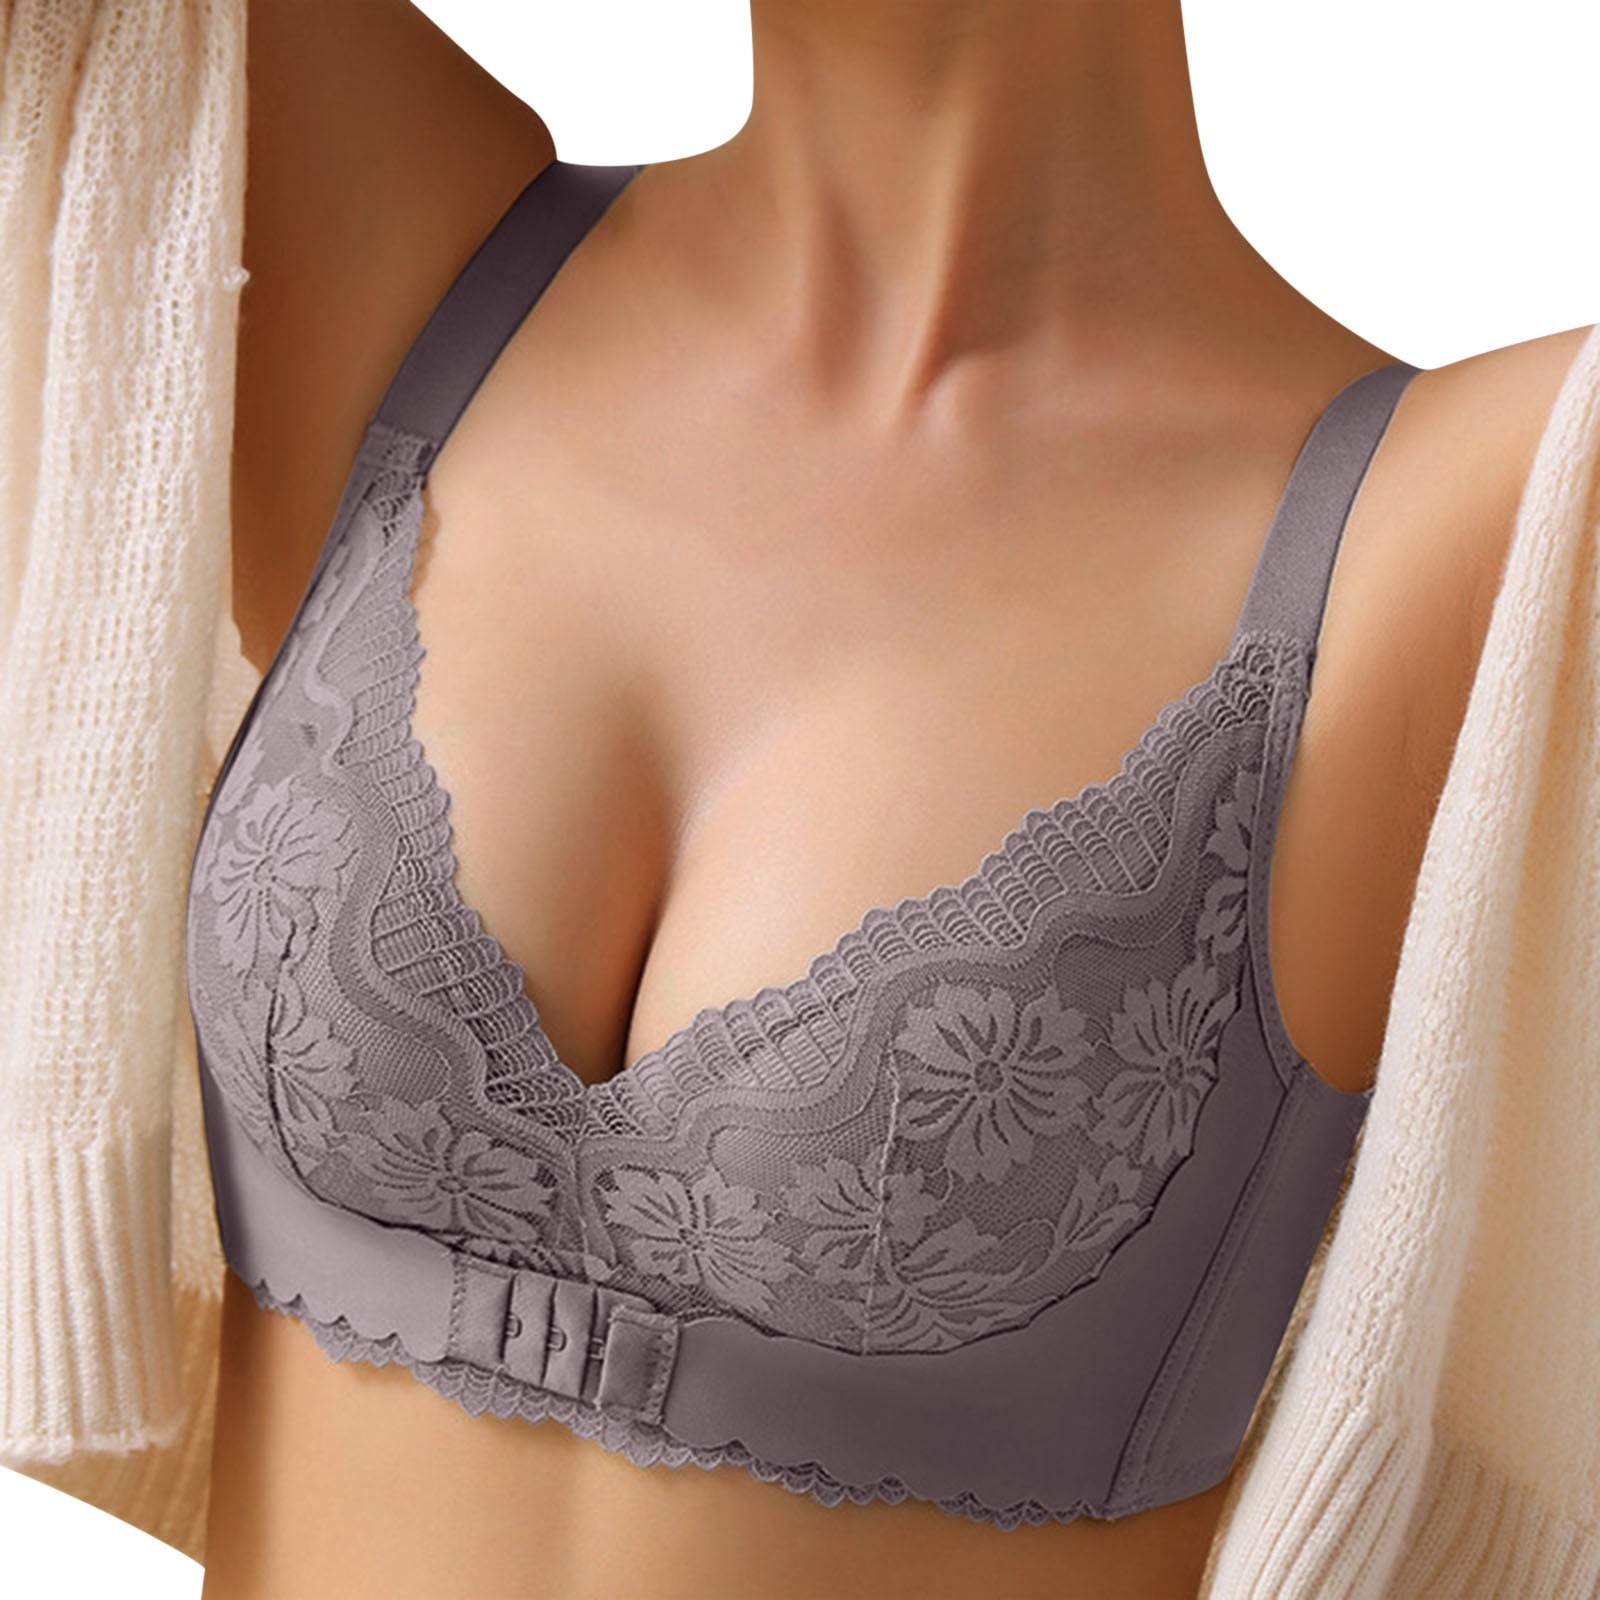 IFG - Our Oriental Look bra is made entirely with lace for a